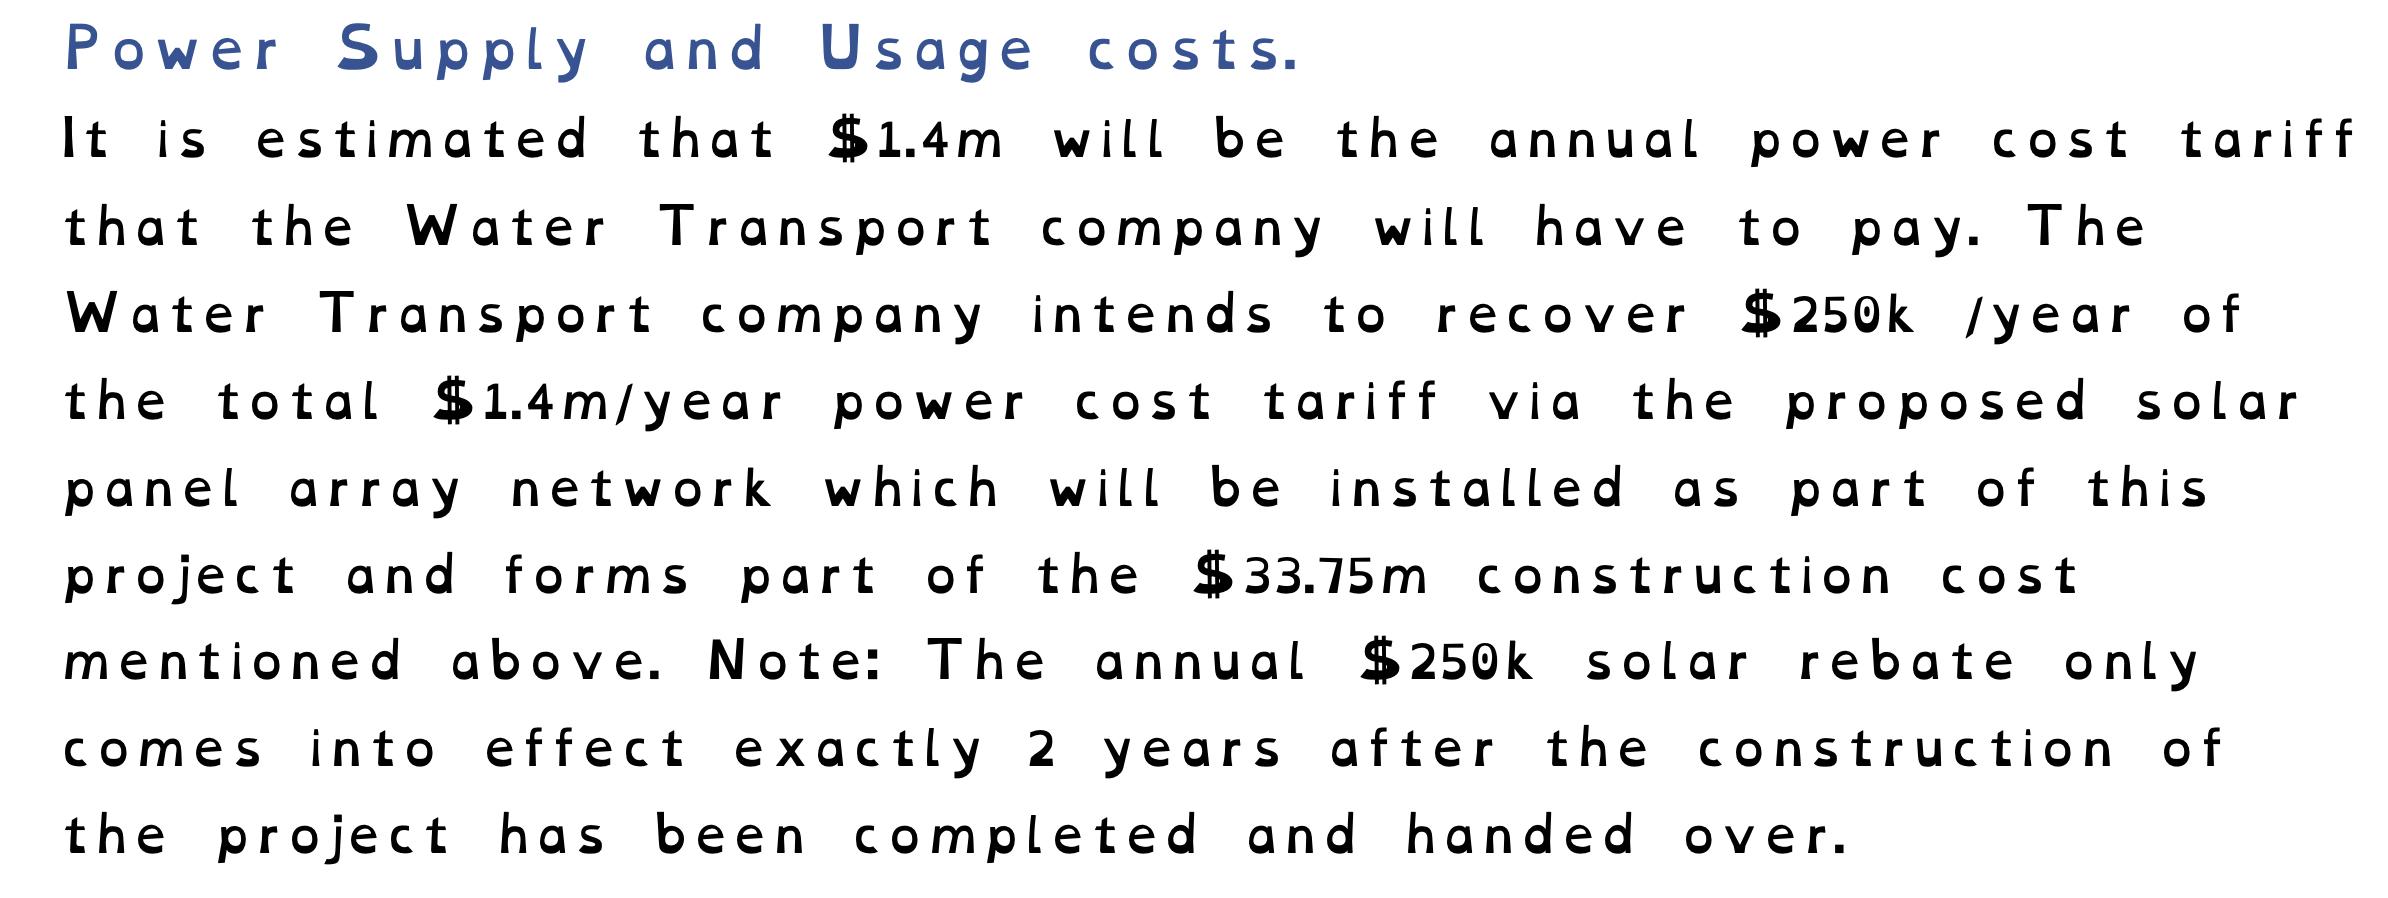 Power Supply and Usage costs. It is estimated that $ 1.4m will be the annual power cost tariff that the Water Transport compa